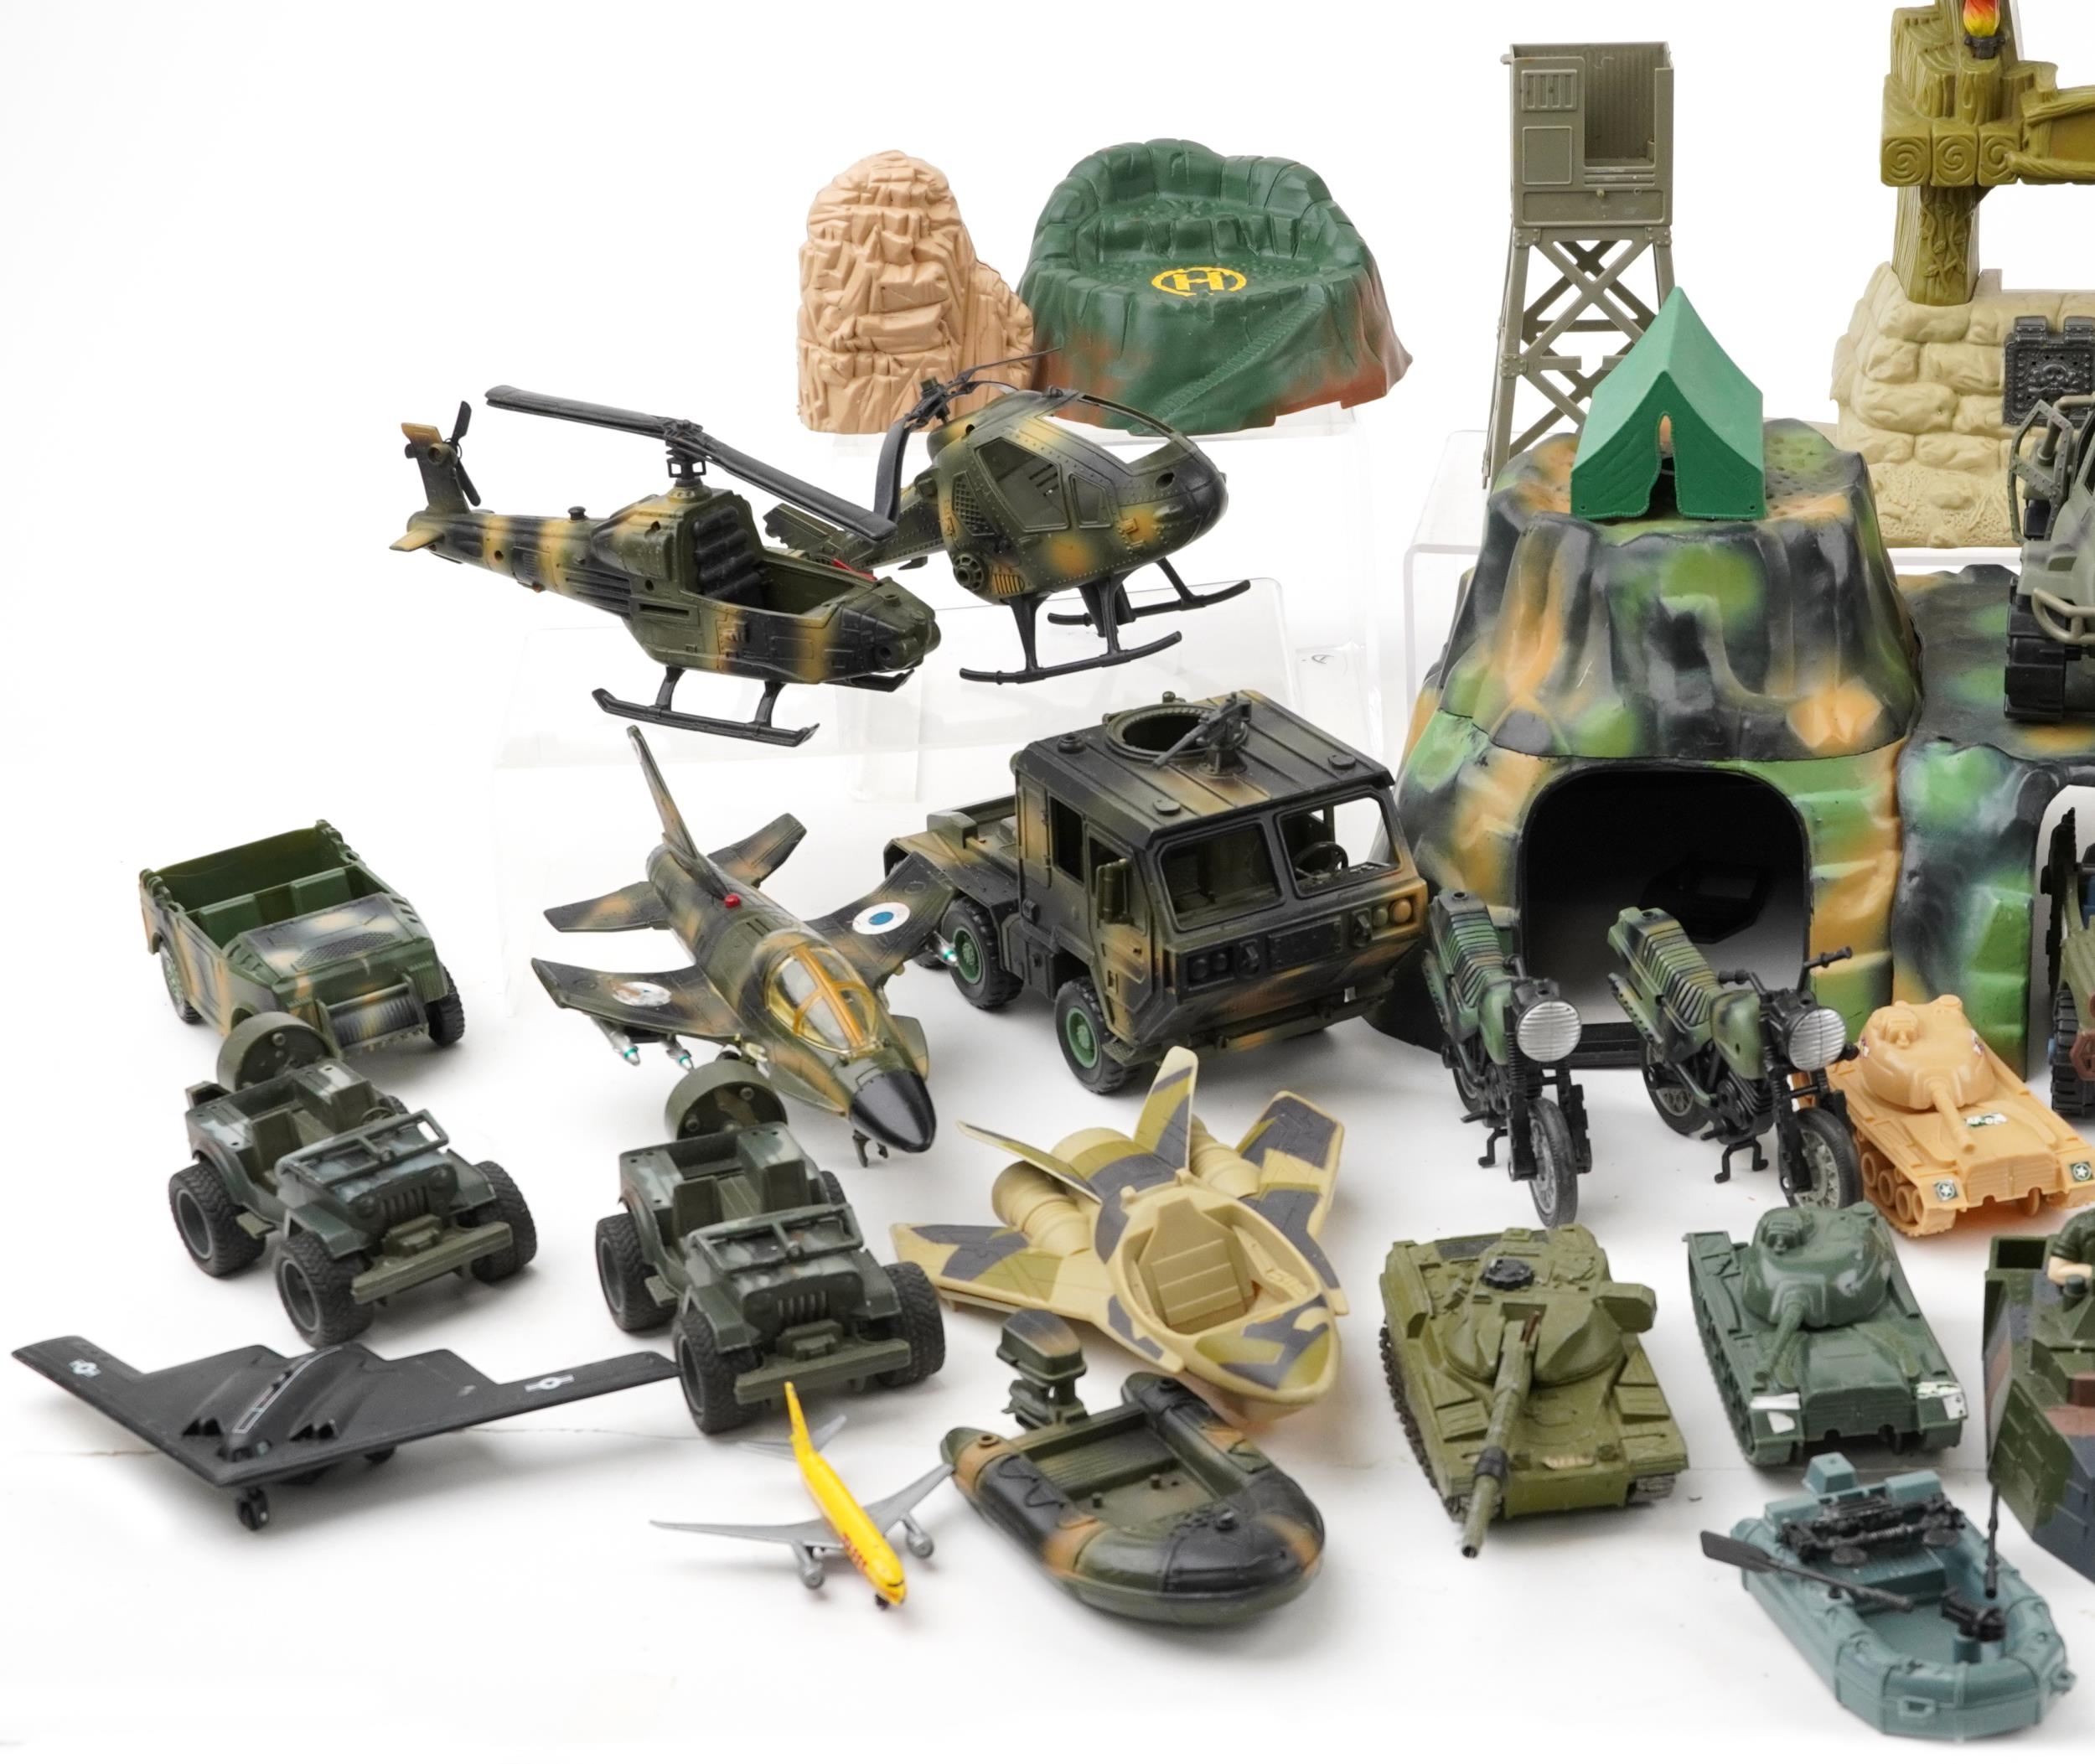 Collection of vintage and later army related toys including fighter jets and tanks - Image 2 of 3